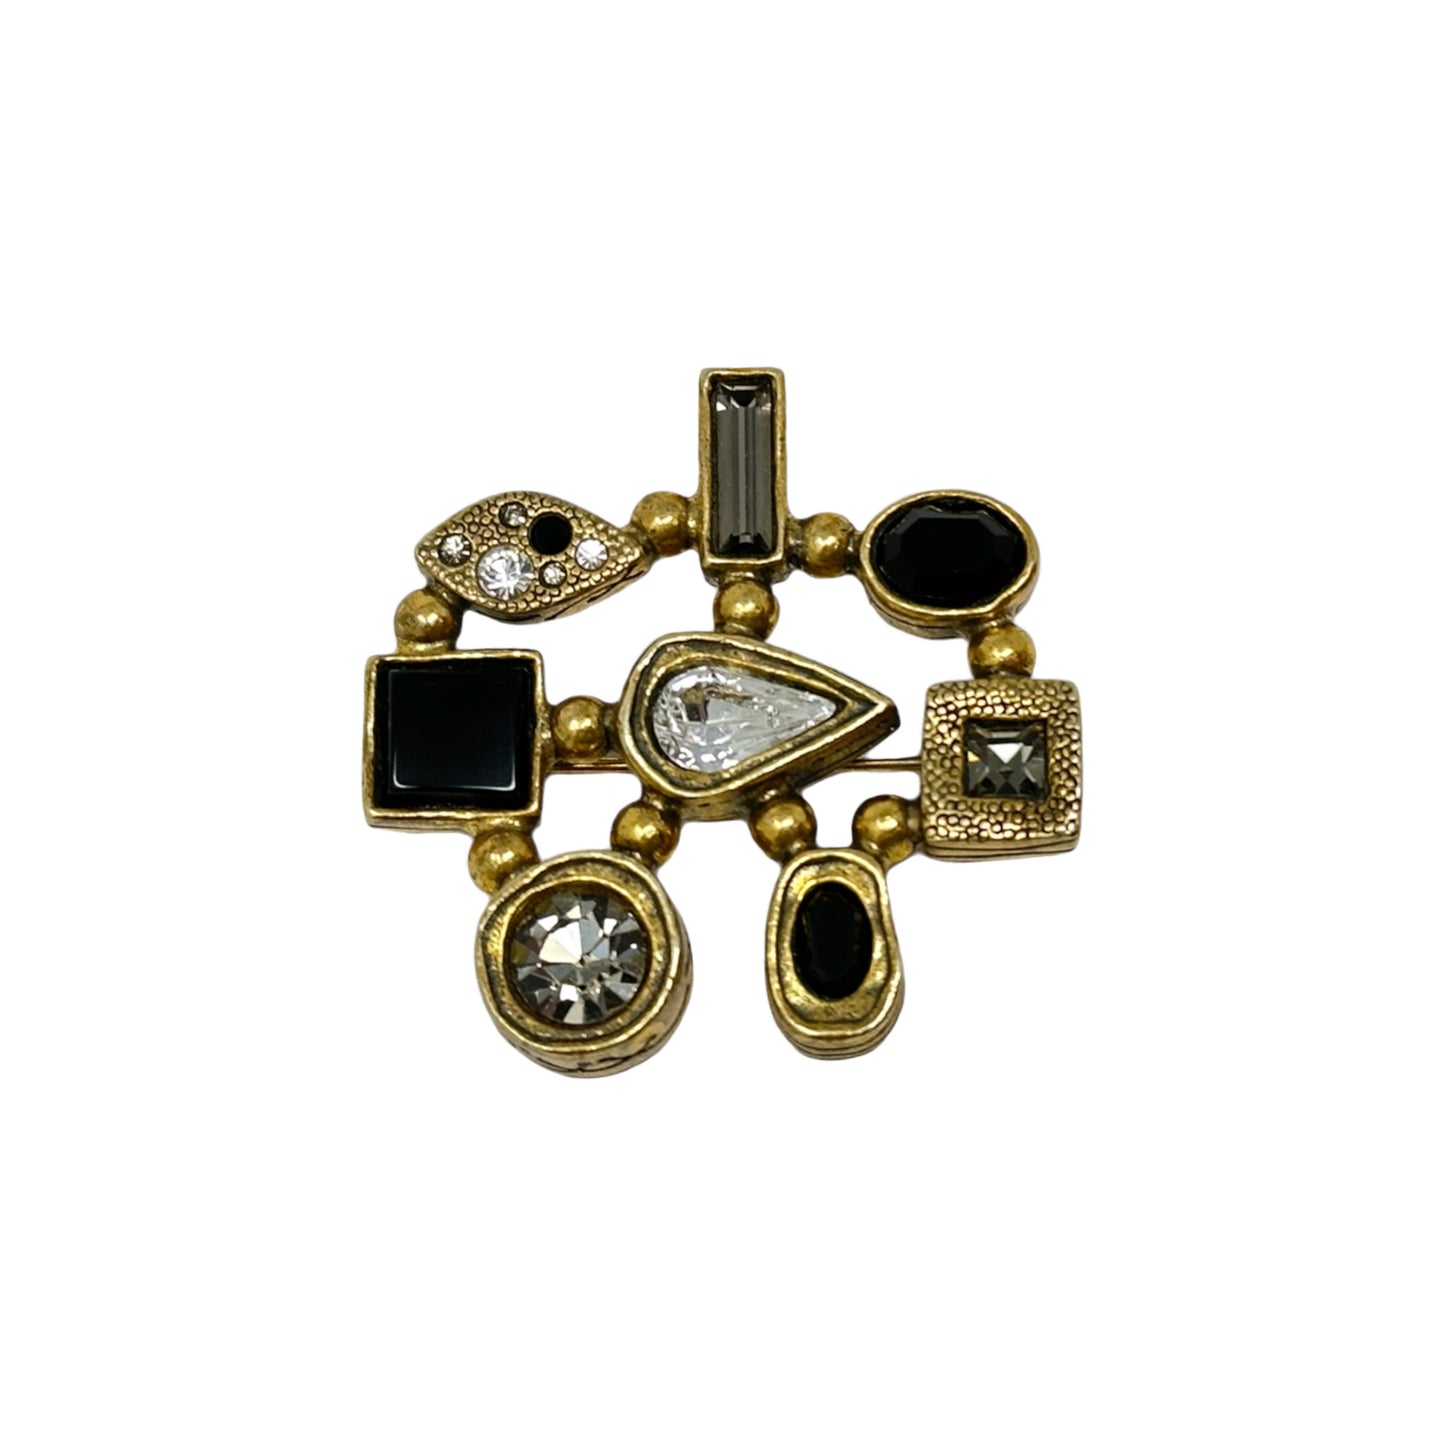 Patricia Locke Connections Brooch in Gold Black & White